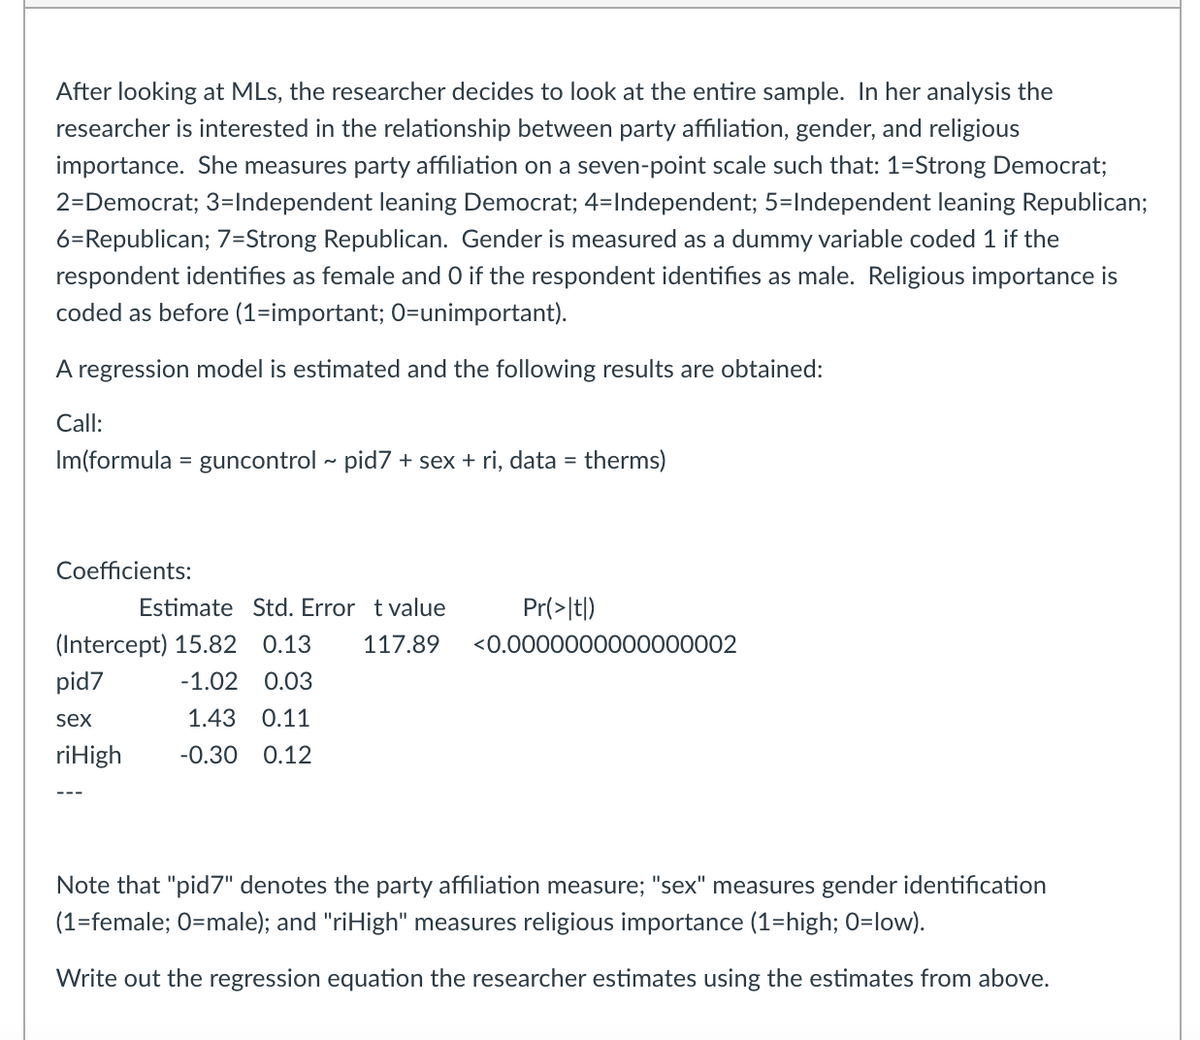 After looking at MLs, the researcher decides to look at the entire sample. In her analysis the
researcher is interested in the relationship between party affiliation, gender, and religious
importance. She measures party affiliation on a seven-point scale such that: 1-Strong Democrat;
2-Democrat; 3=Independent leaning Democrat; 4=Independent; 5=Independent leaning Republican;
6=Republican; 7=Strong Republican. Gender is measured as a dummy variable coded 1 if the
respondent identifies as female and O if the respondent identifies as male. Religious importance is
coded as before (1-important; O=unimportant).
A regression model is estimated and the following results are obtained:
Call:
Im(formula = guncontrol ~ pid7 + sex + ri, data = therms)
Coefficients:
Estimate Std. Error t value
Pr(>|t|)
(Intercept) 15.82 0.13 117.89 <0.0000000000000002
pid7
-1.02 0.03
sex
1.43 0.11
ri High -0.30 0.12
Note that "pid7" denotes the party affiliation measure; "sex" measures gender identification
(1=female; O=male); and "riHigh" measures religious importance (1=high; 0=low).
Write out the regression equation the researcher estimates using the estimates from above.